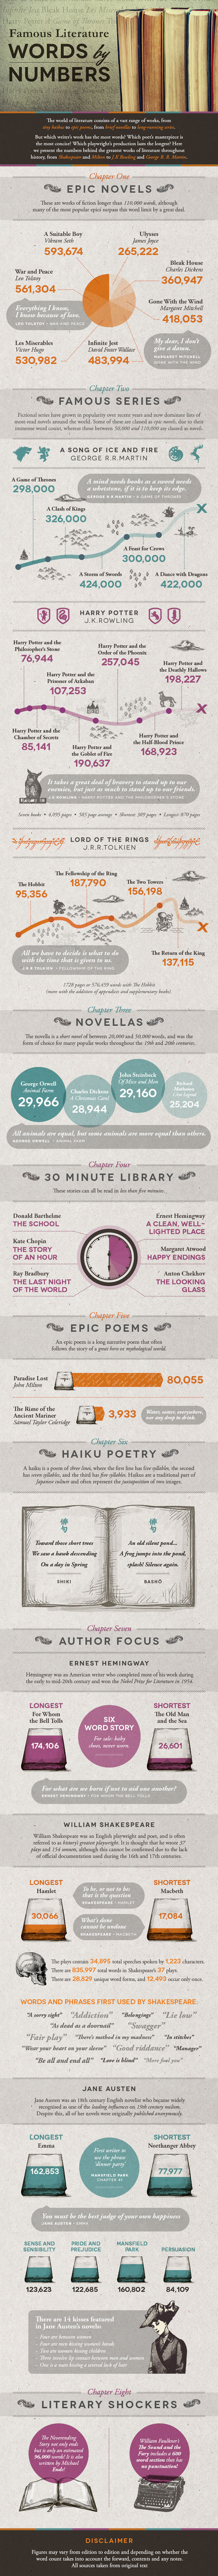 word count famous books